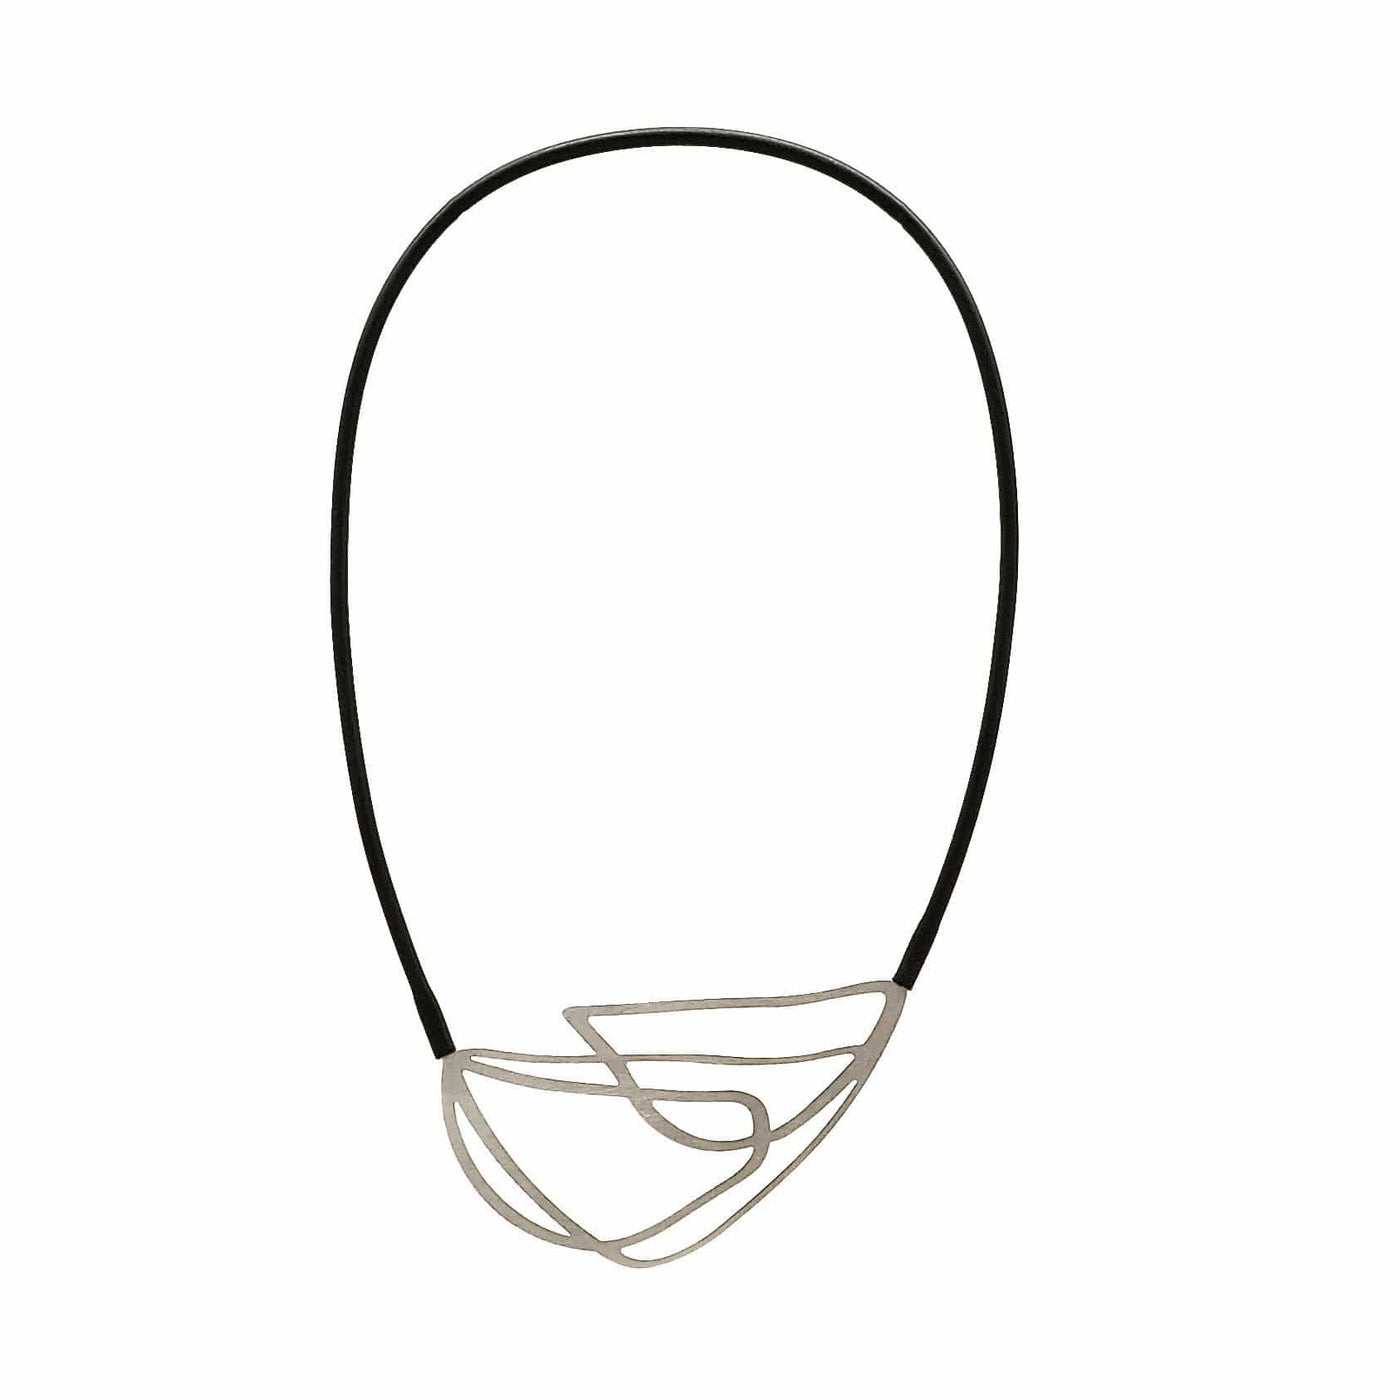 Entwine Necklace - Raw Stainless Steel - inSync design